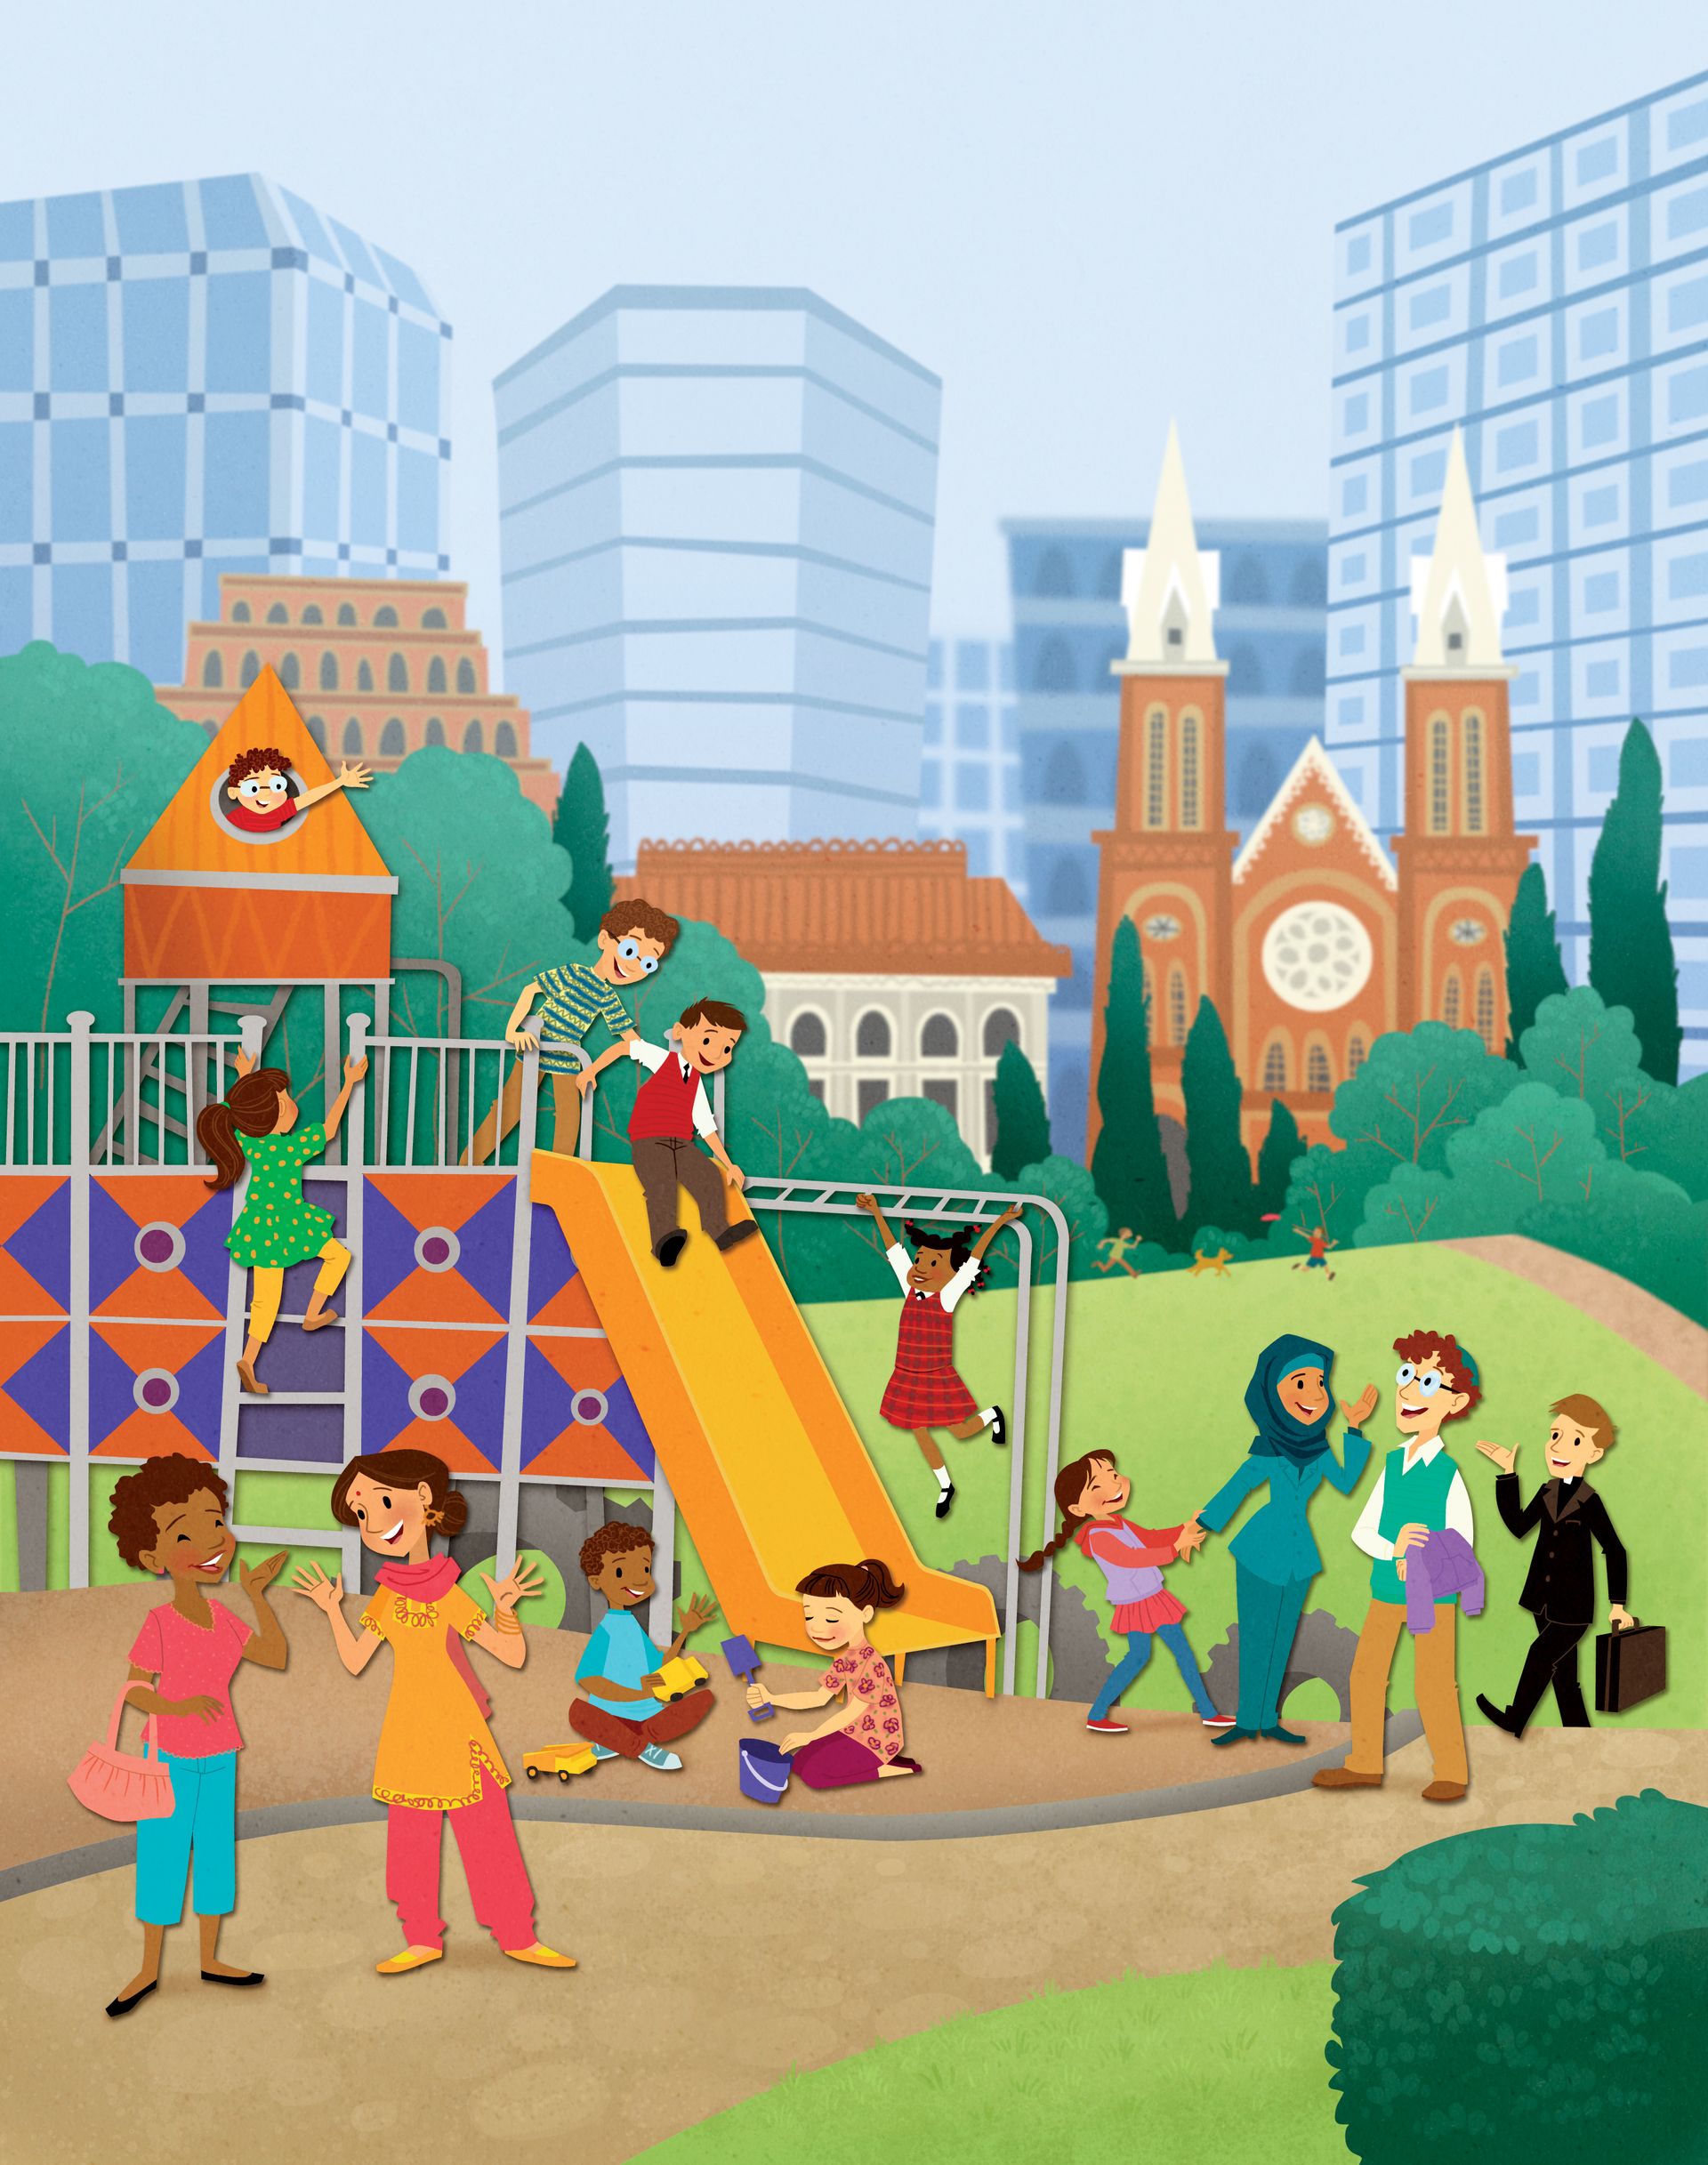 A group of children play at a playground in a big city.